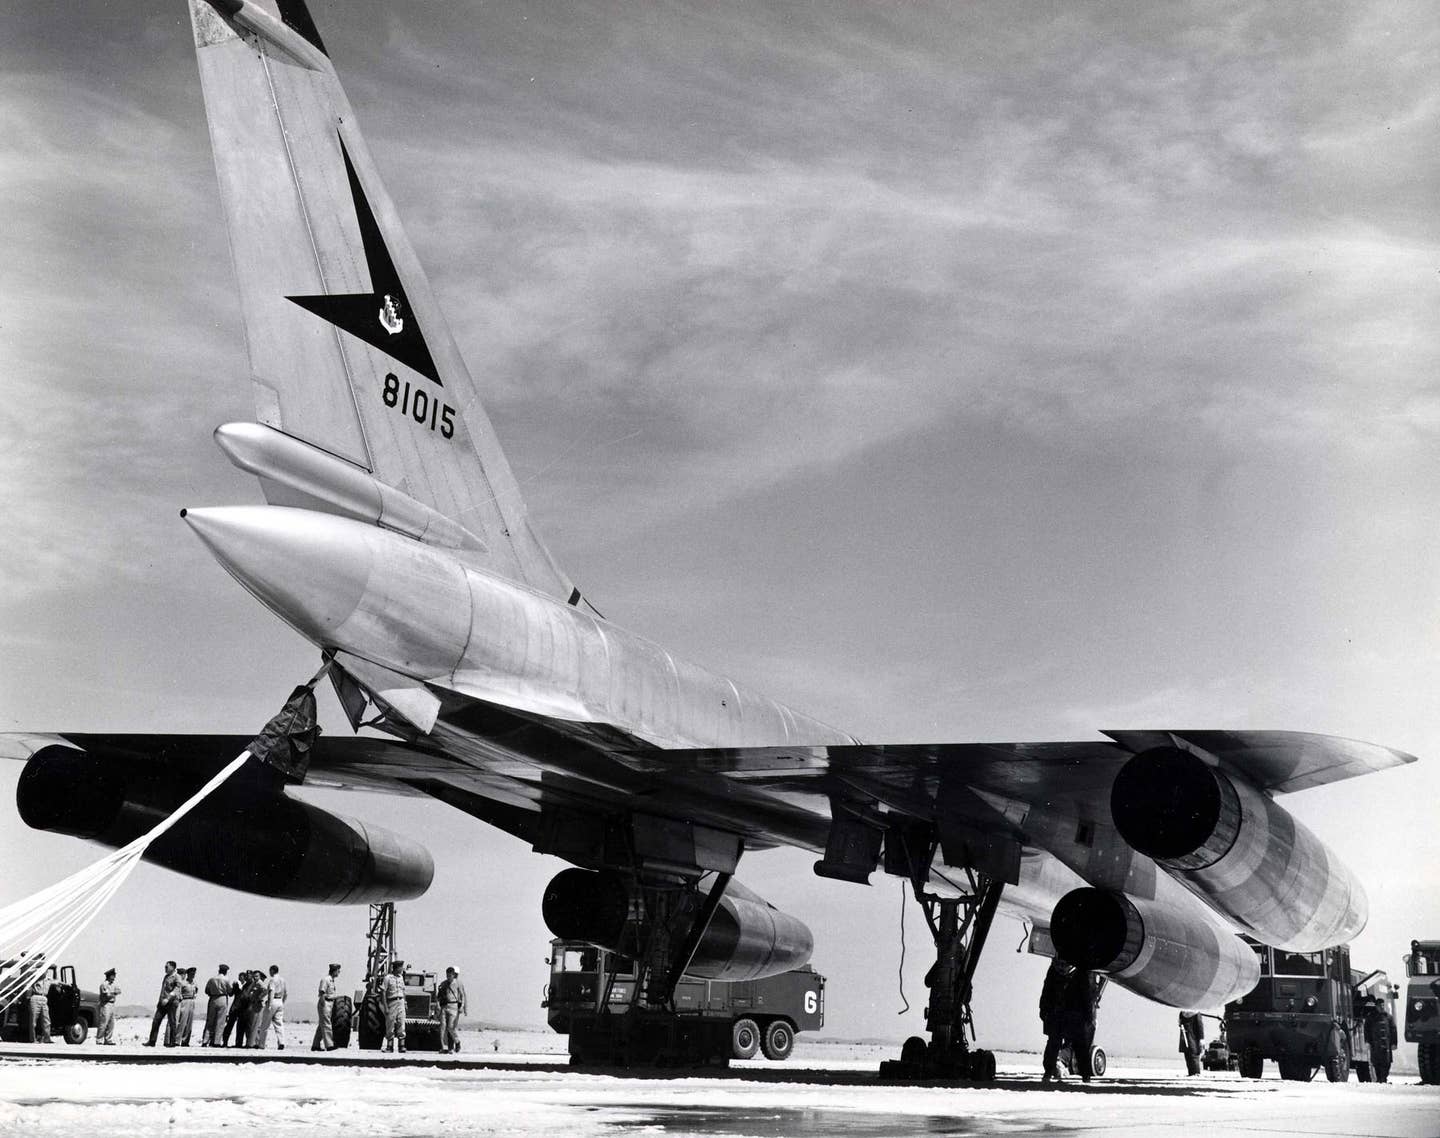 RB-58A Hustler 58-1015 seen on April 13, 1960, after a failure of the right main landing gear on takeoff at Edwards Air Force Base, California. <em>U.S. Air Force</em>